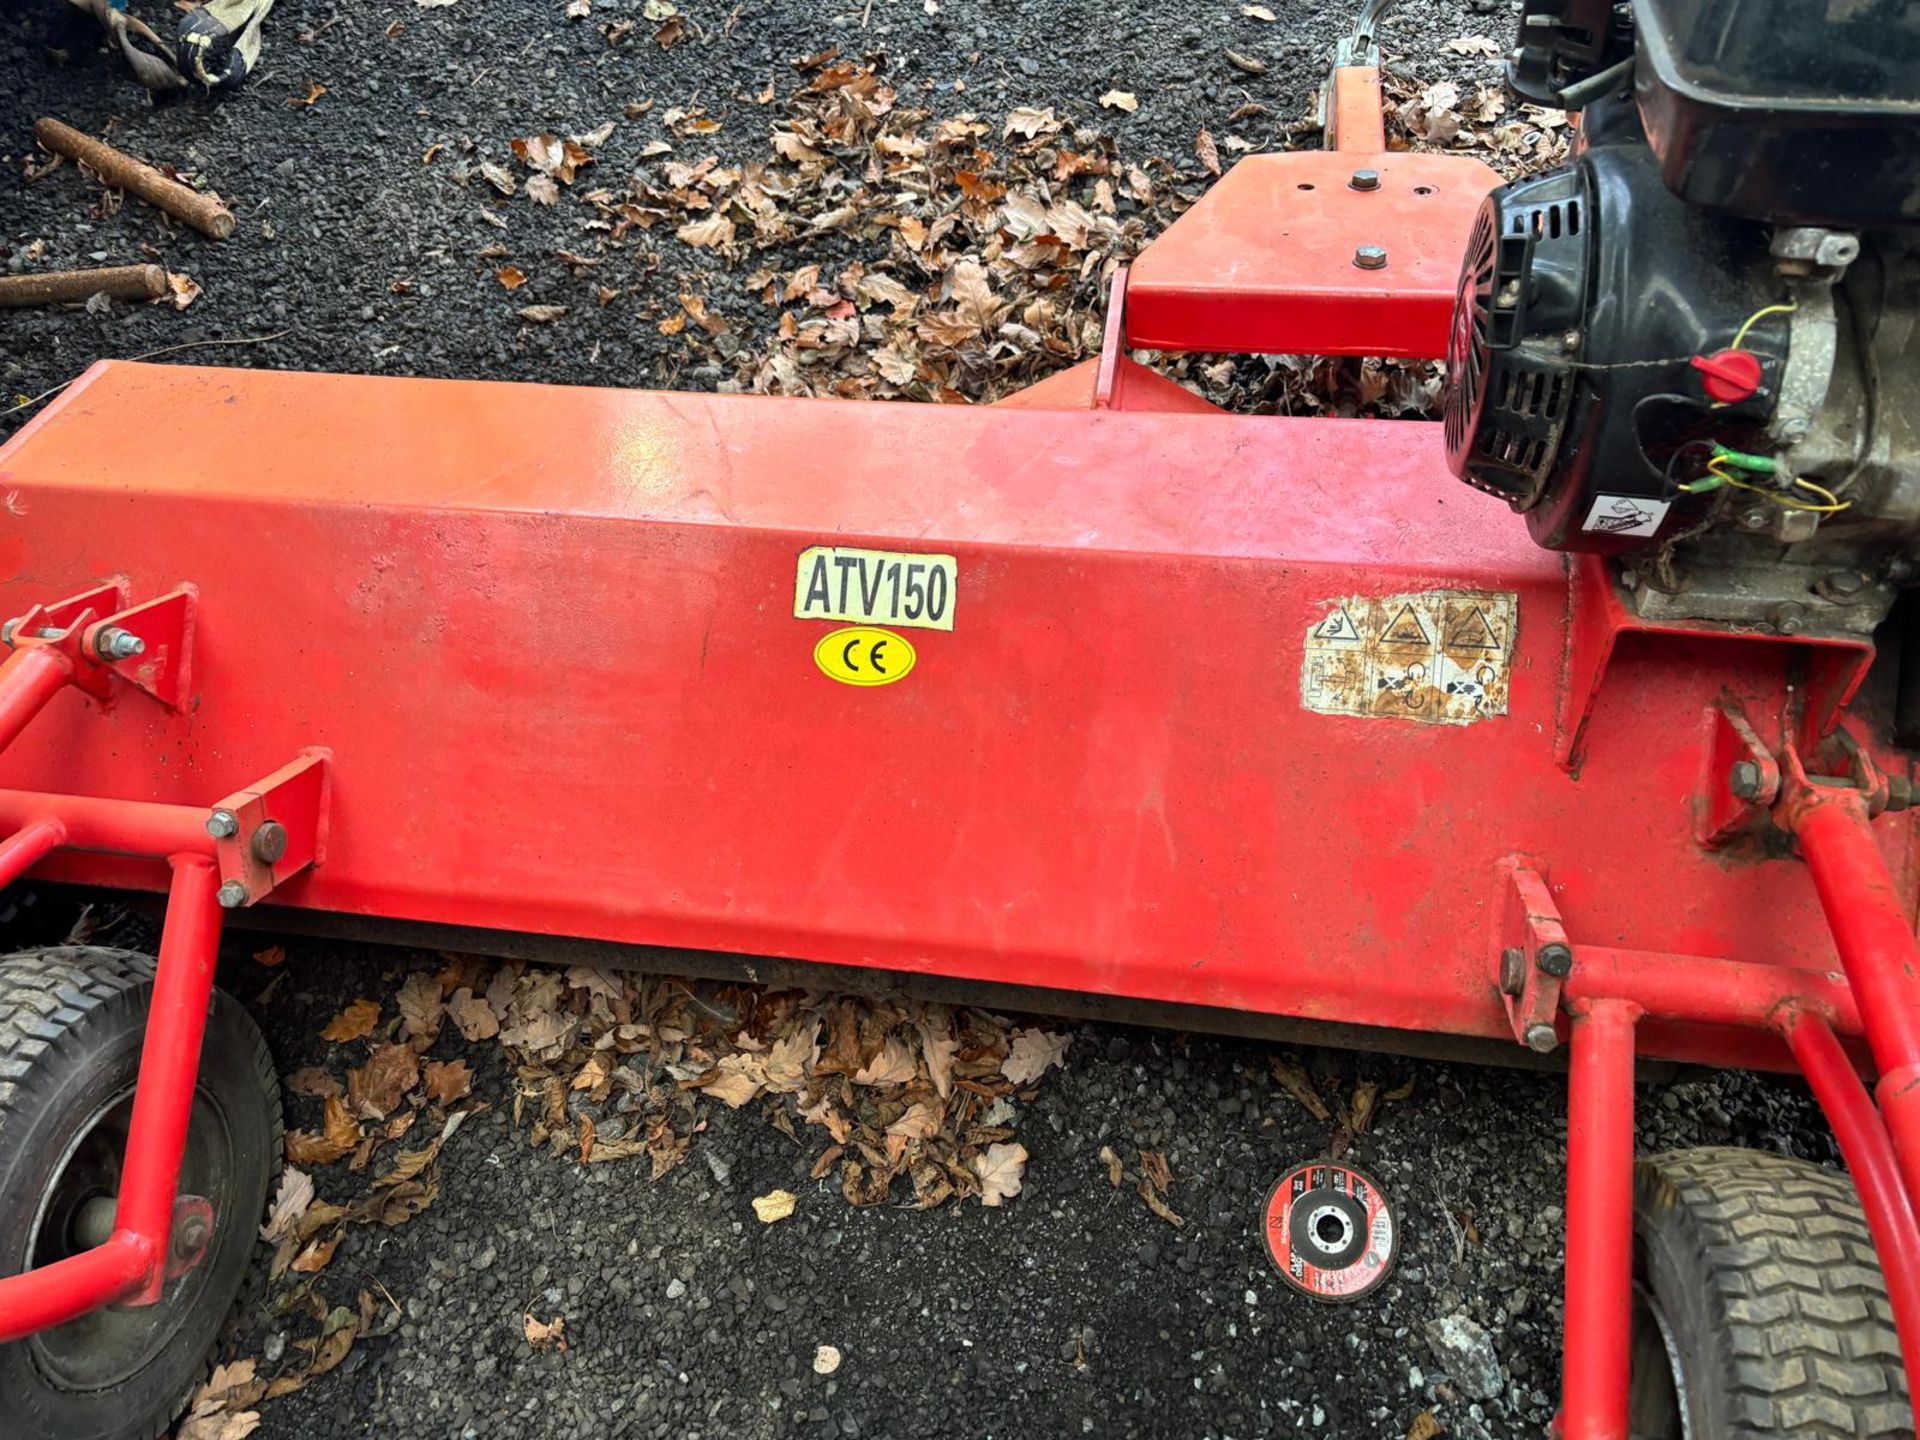 HIGH-PERFORMANCE ATV QUAD BIKE FLAIL MOWER: 4.5FT WIDE, 420CC ENGINE - EXCELLENT CONDITION! - Image 3 of 7